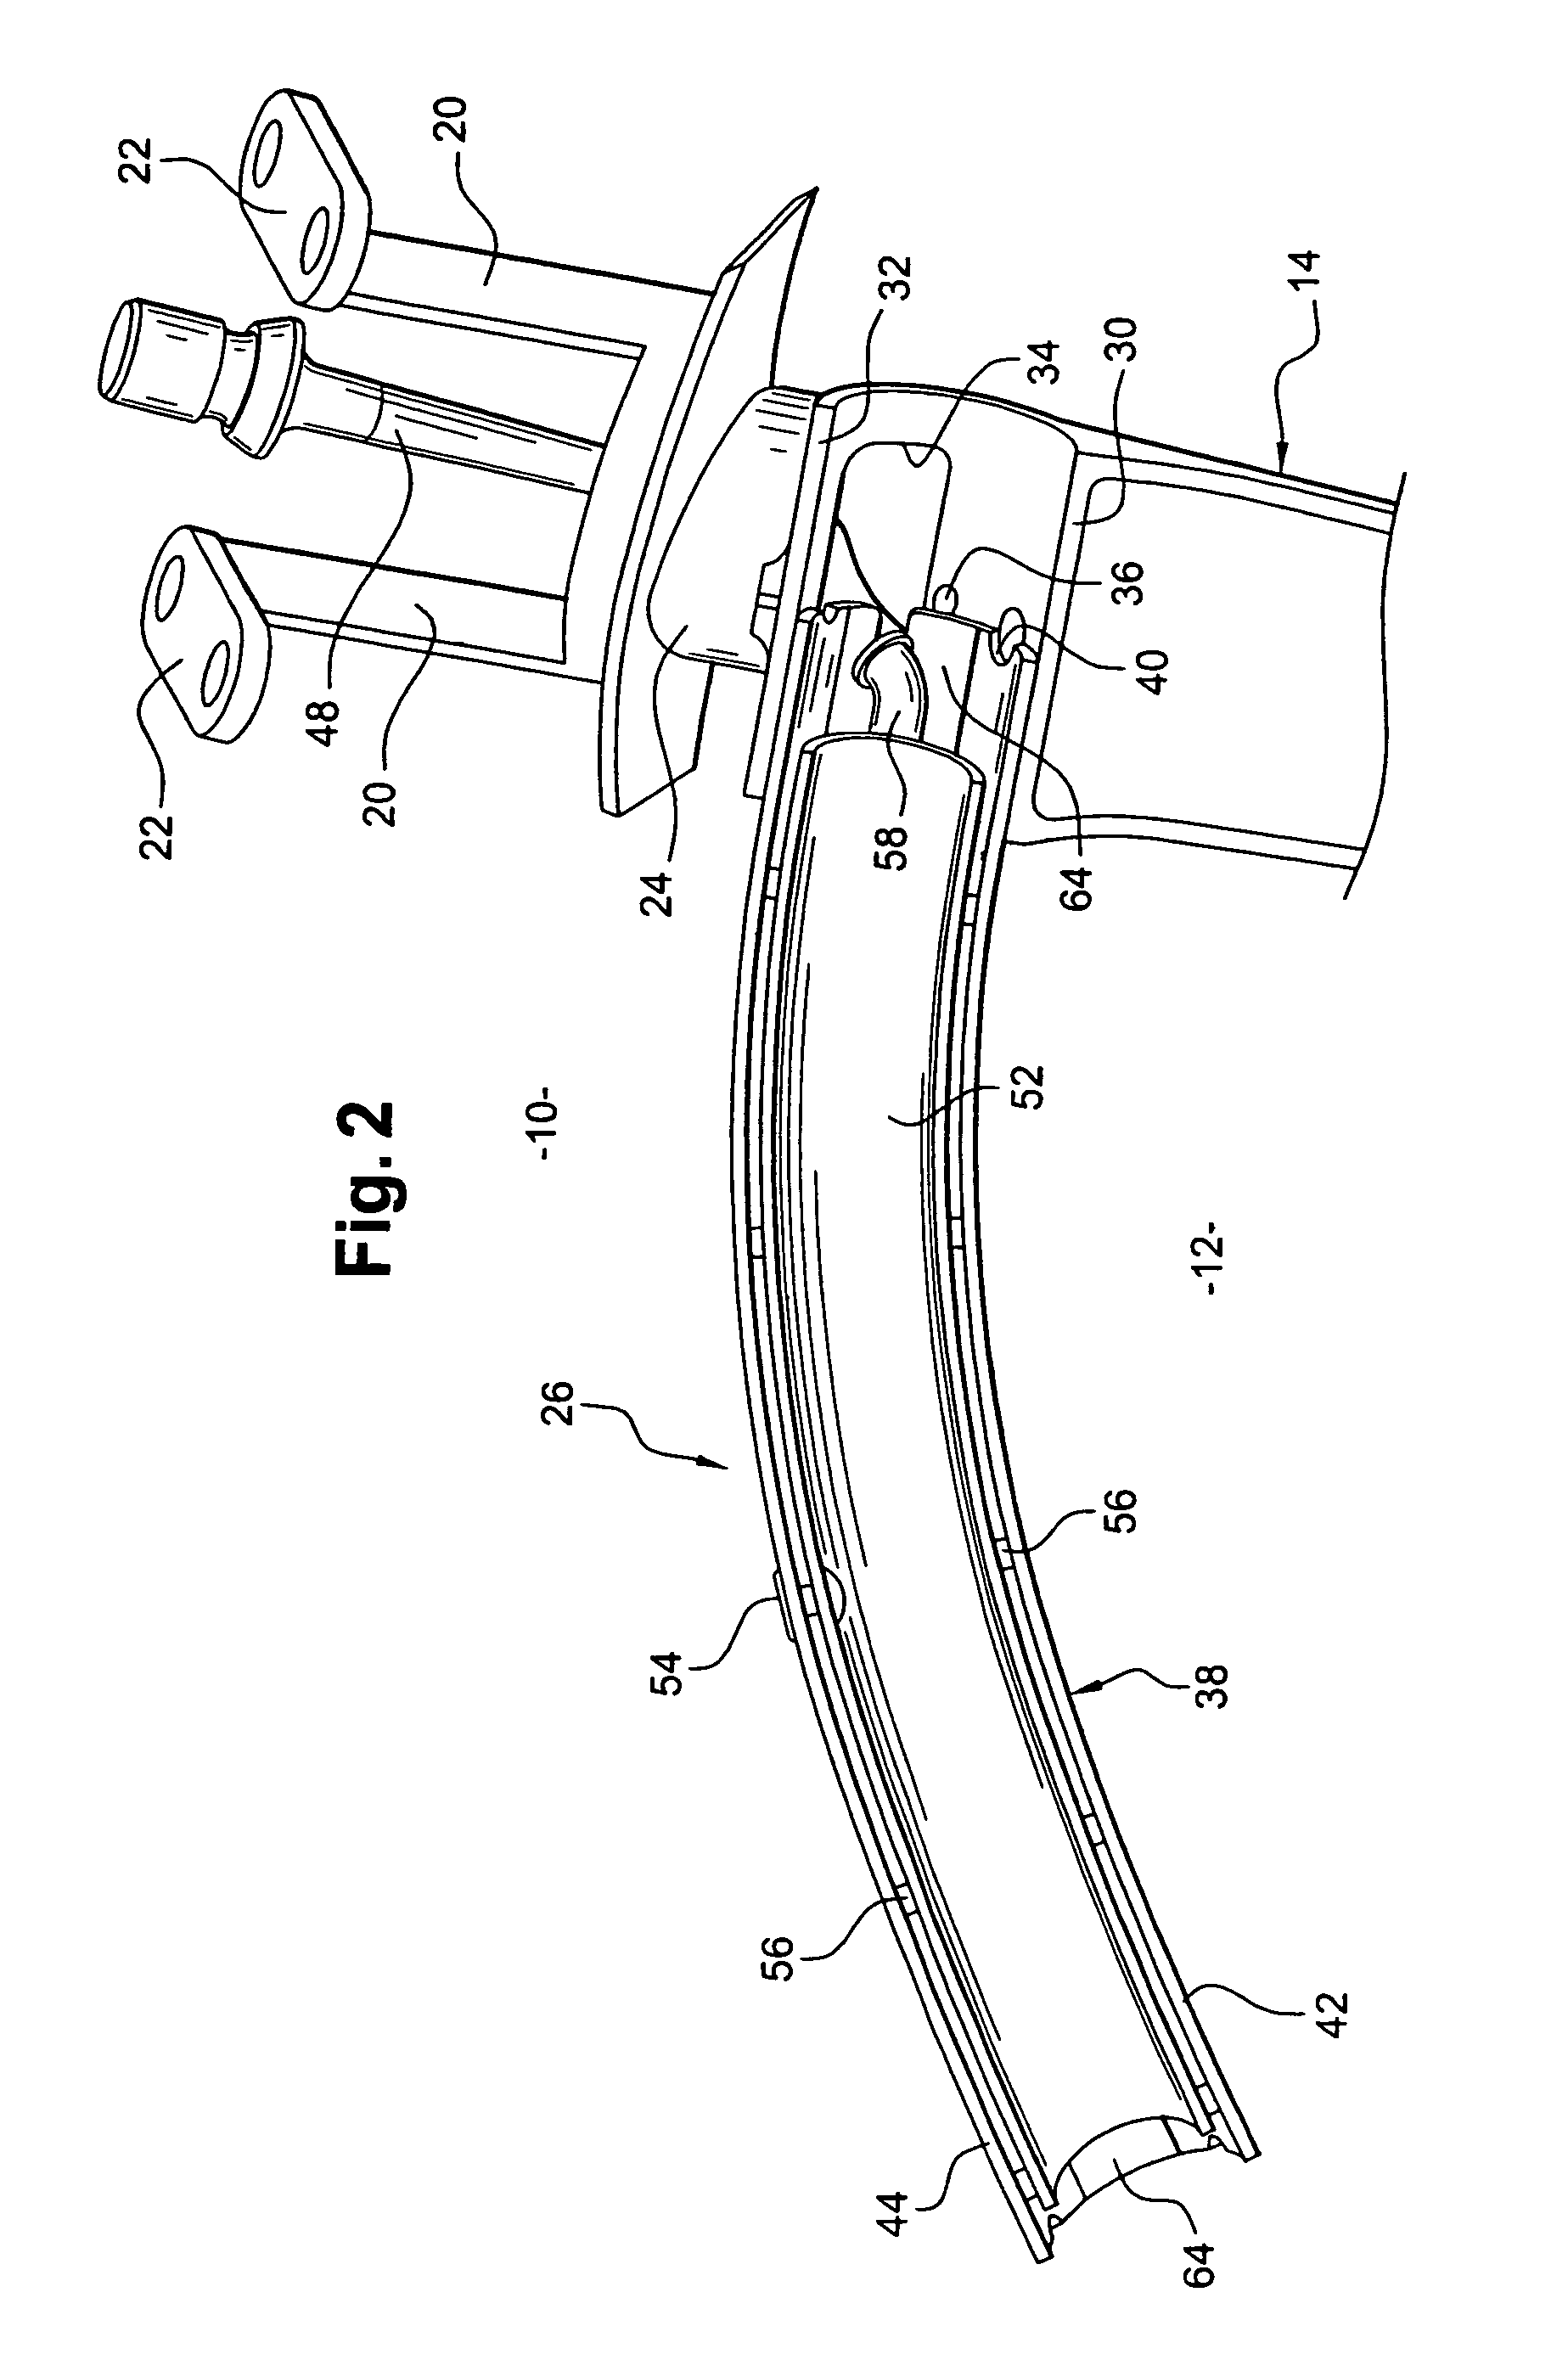 Device for feeding air and fuel to a burner ring in an after-burner chamber